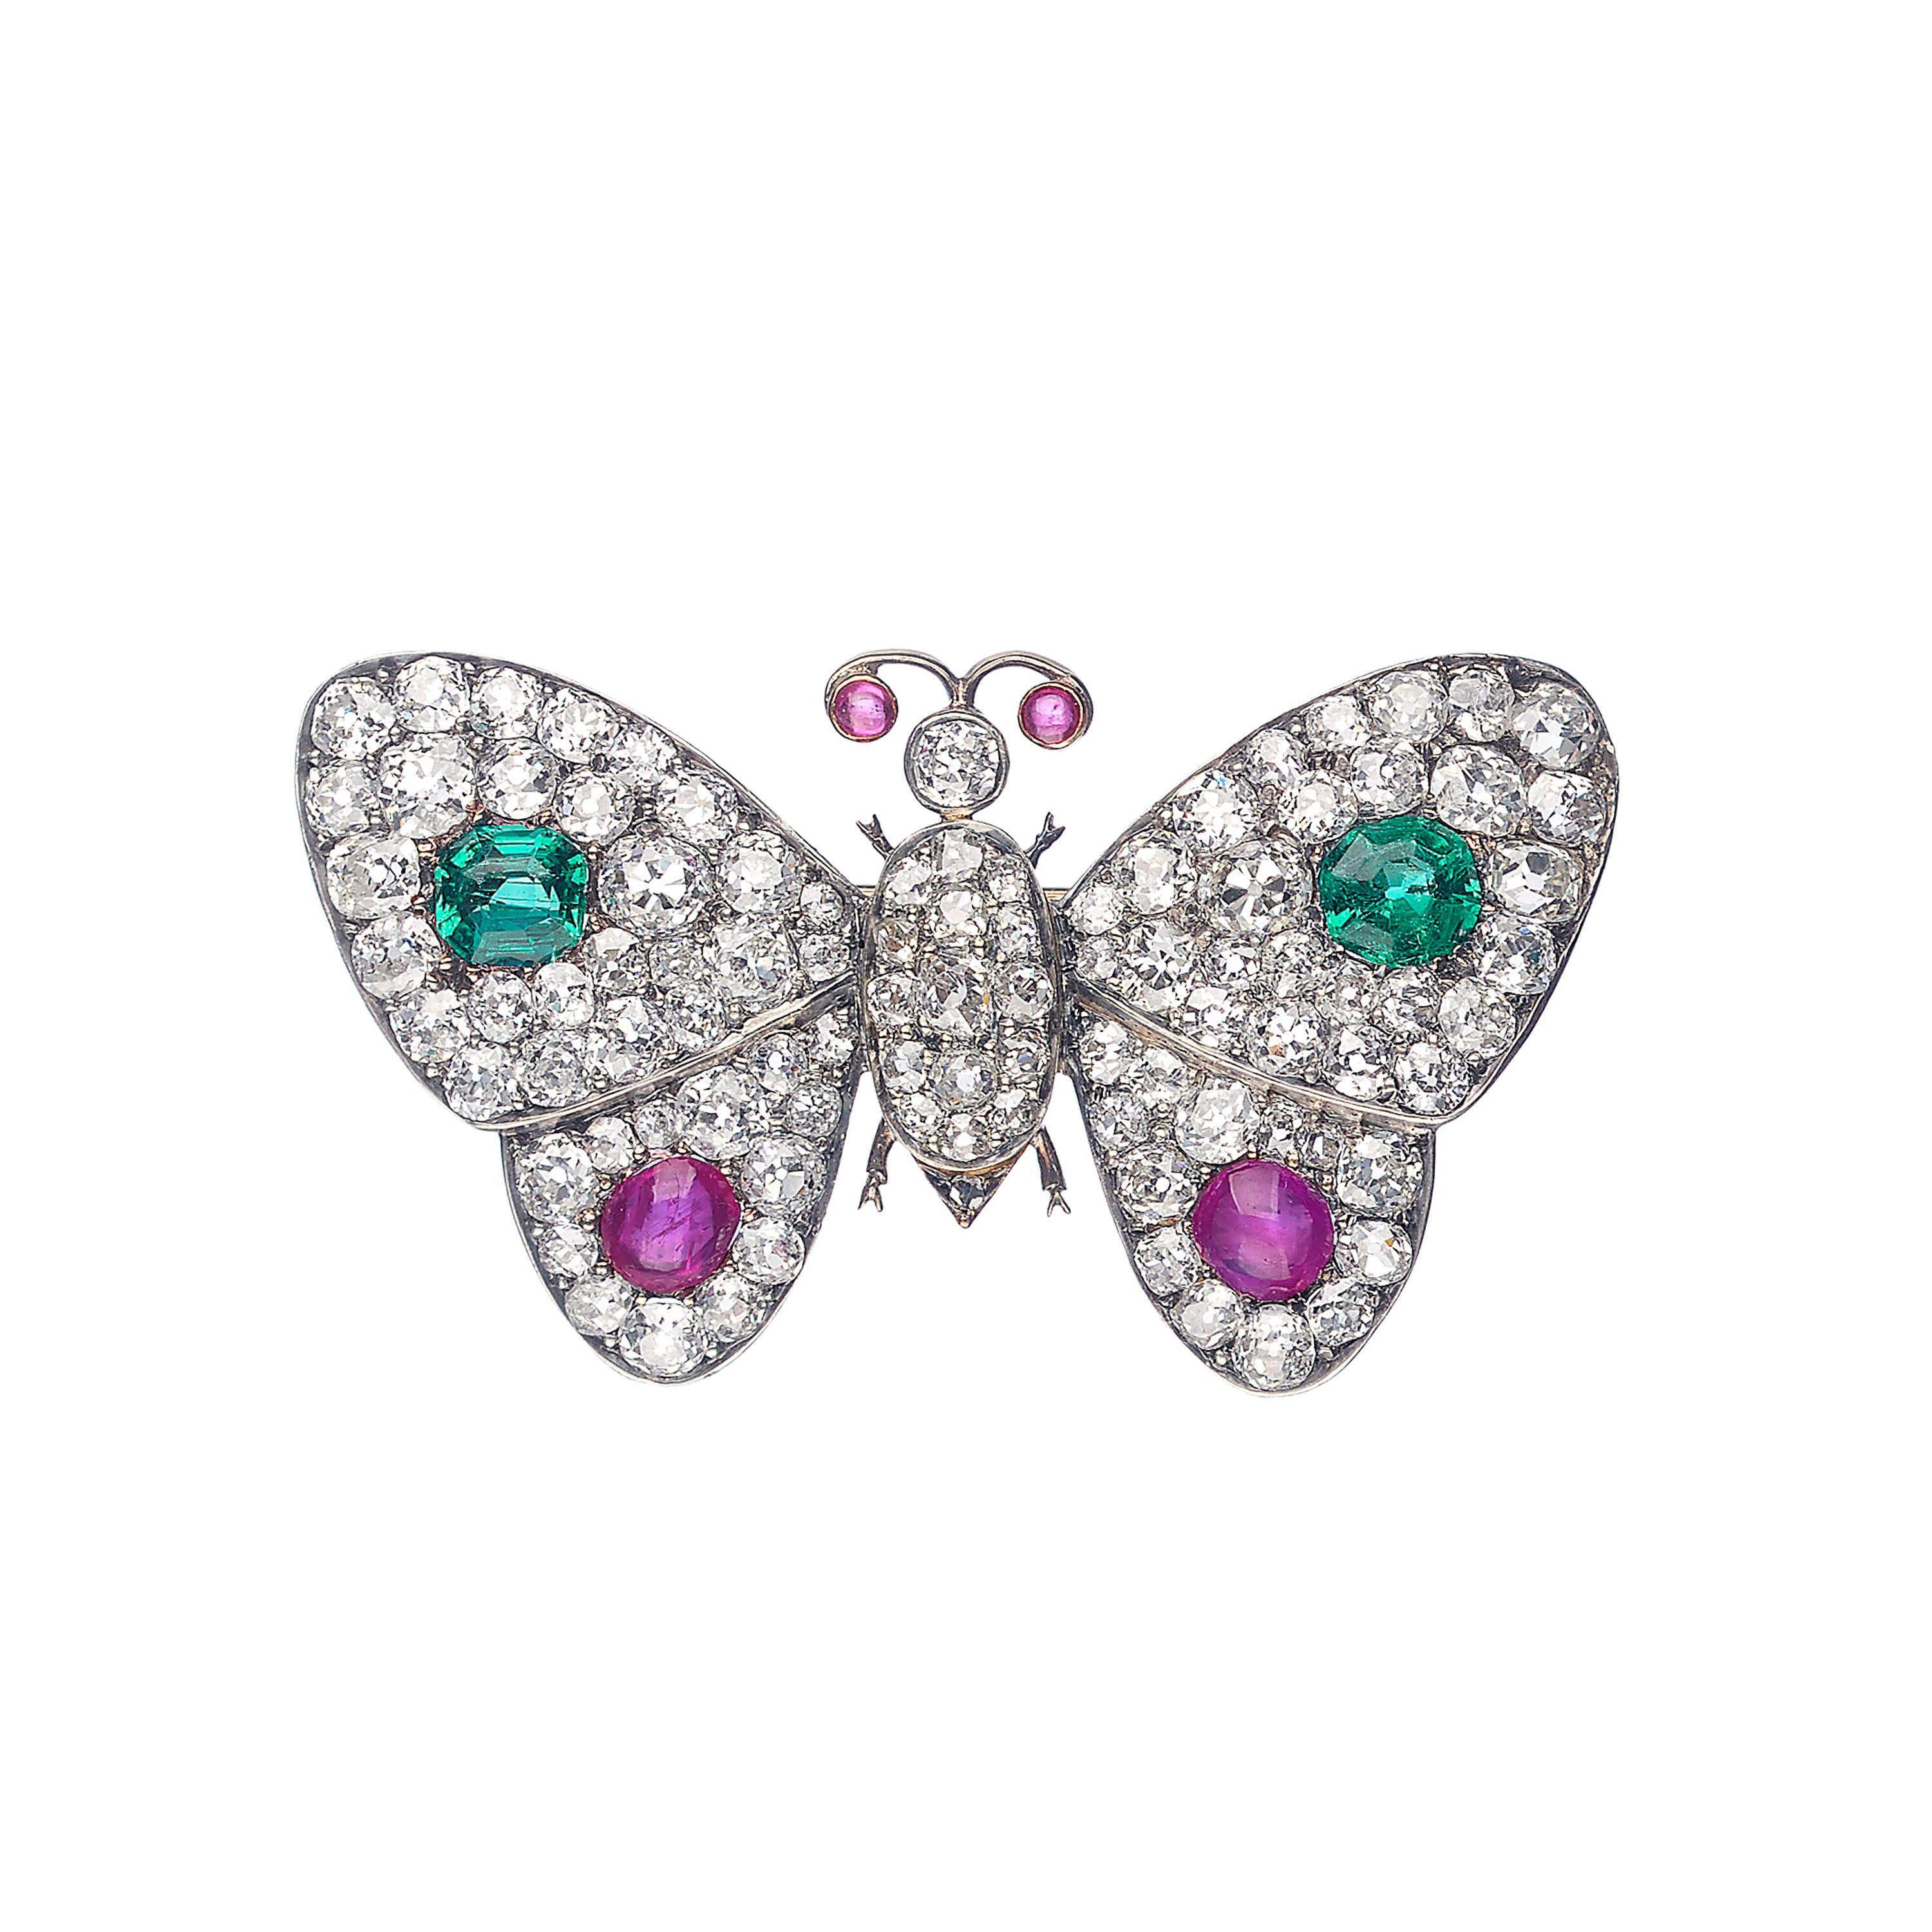 An antique butterfly brooch, with old-cut diamond pavé set thorax and wings, with a faceted emerald in each top wing, with a total weight of approximately 1.30 carats and a cabochon-cut ruby in each lower wing, with a total weight of approximately